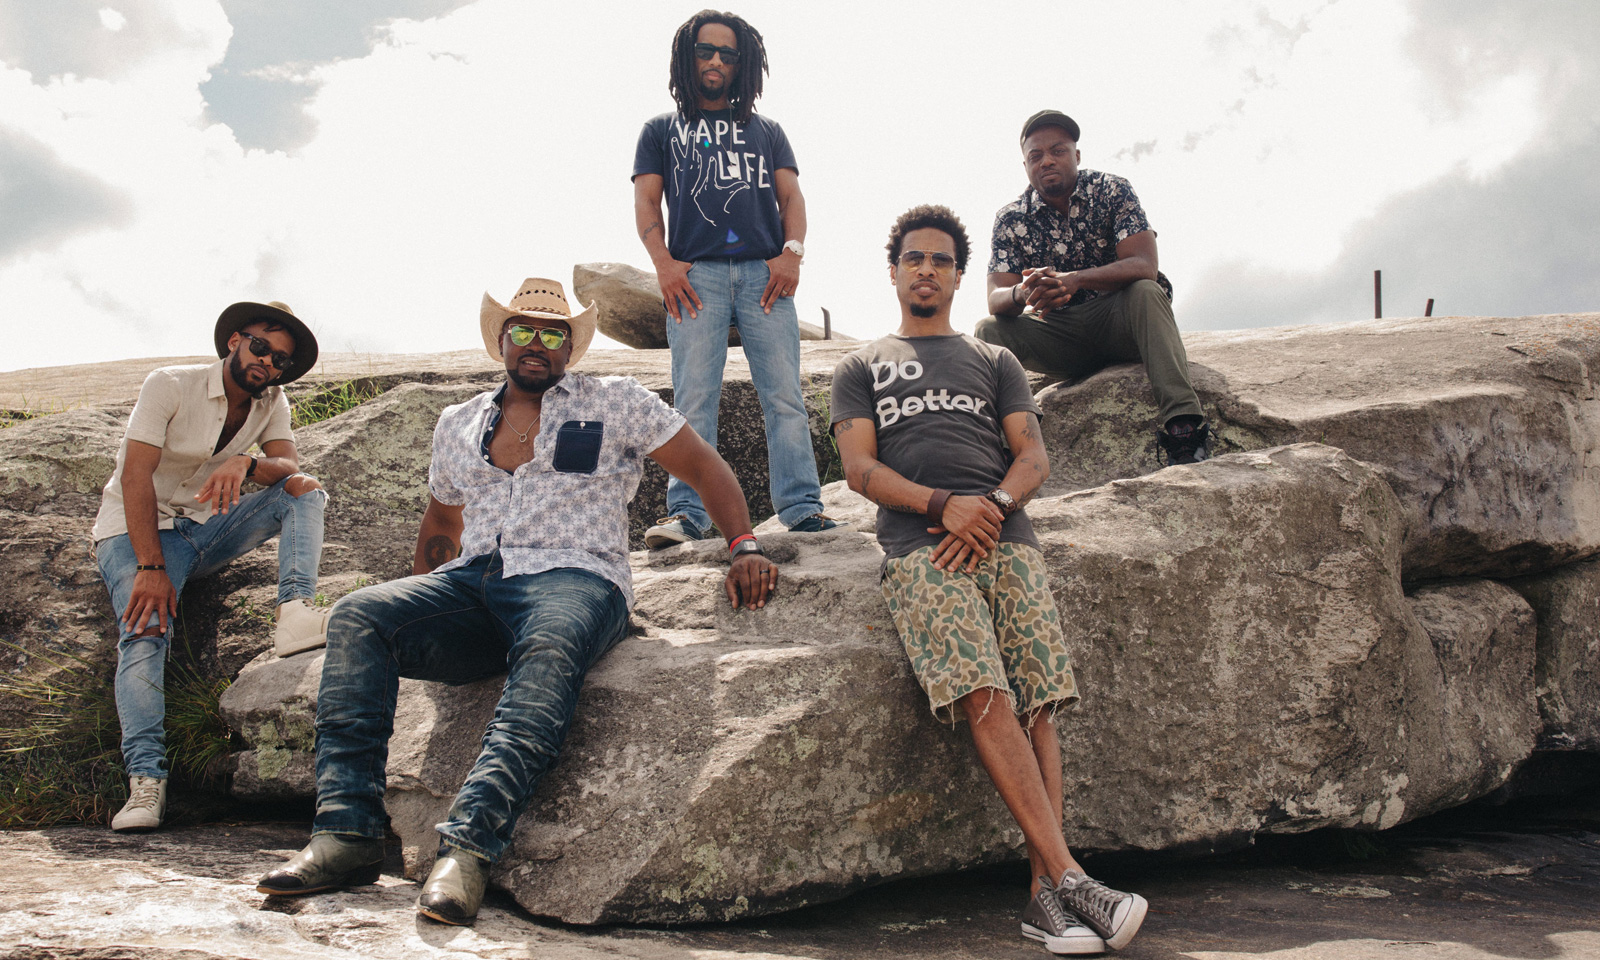 The Grammy nominated rap group Nappy Roots is brewing up their own unique craft beers